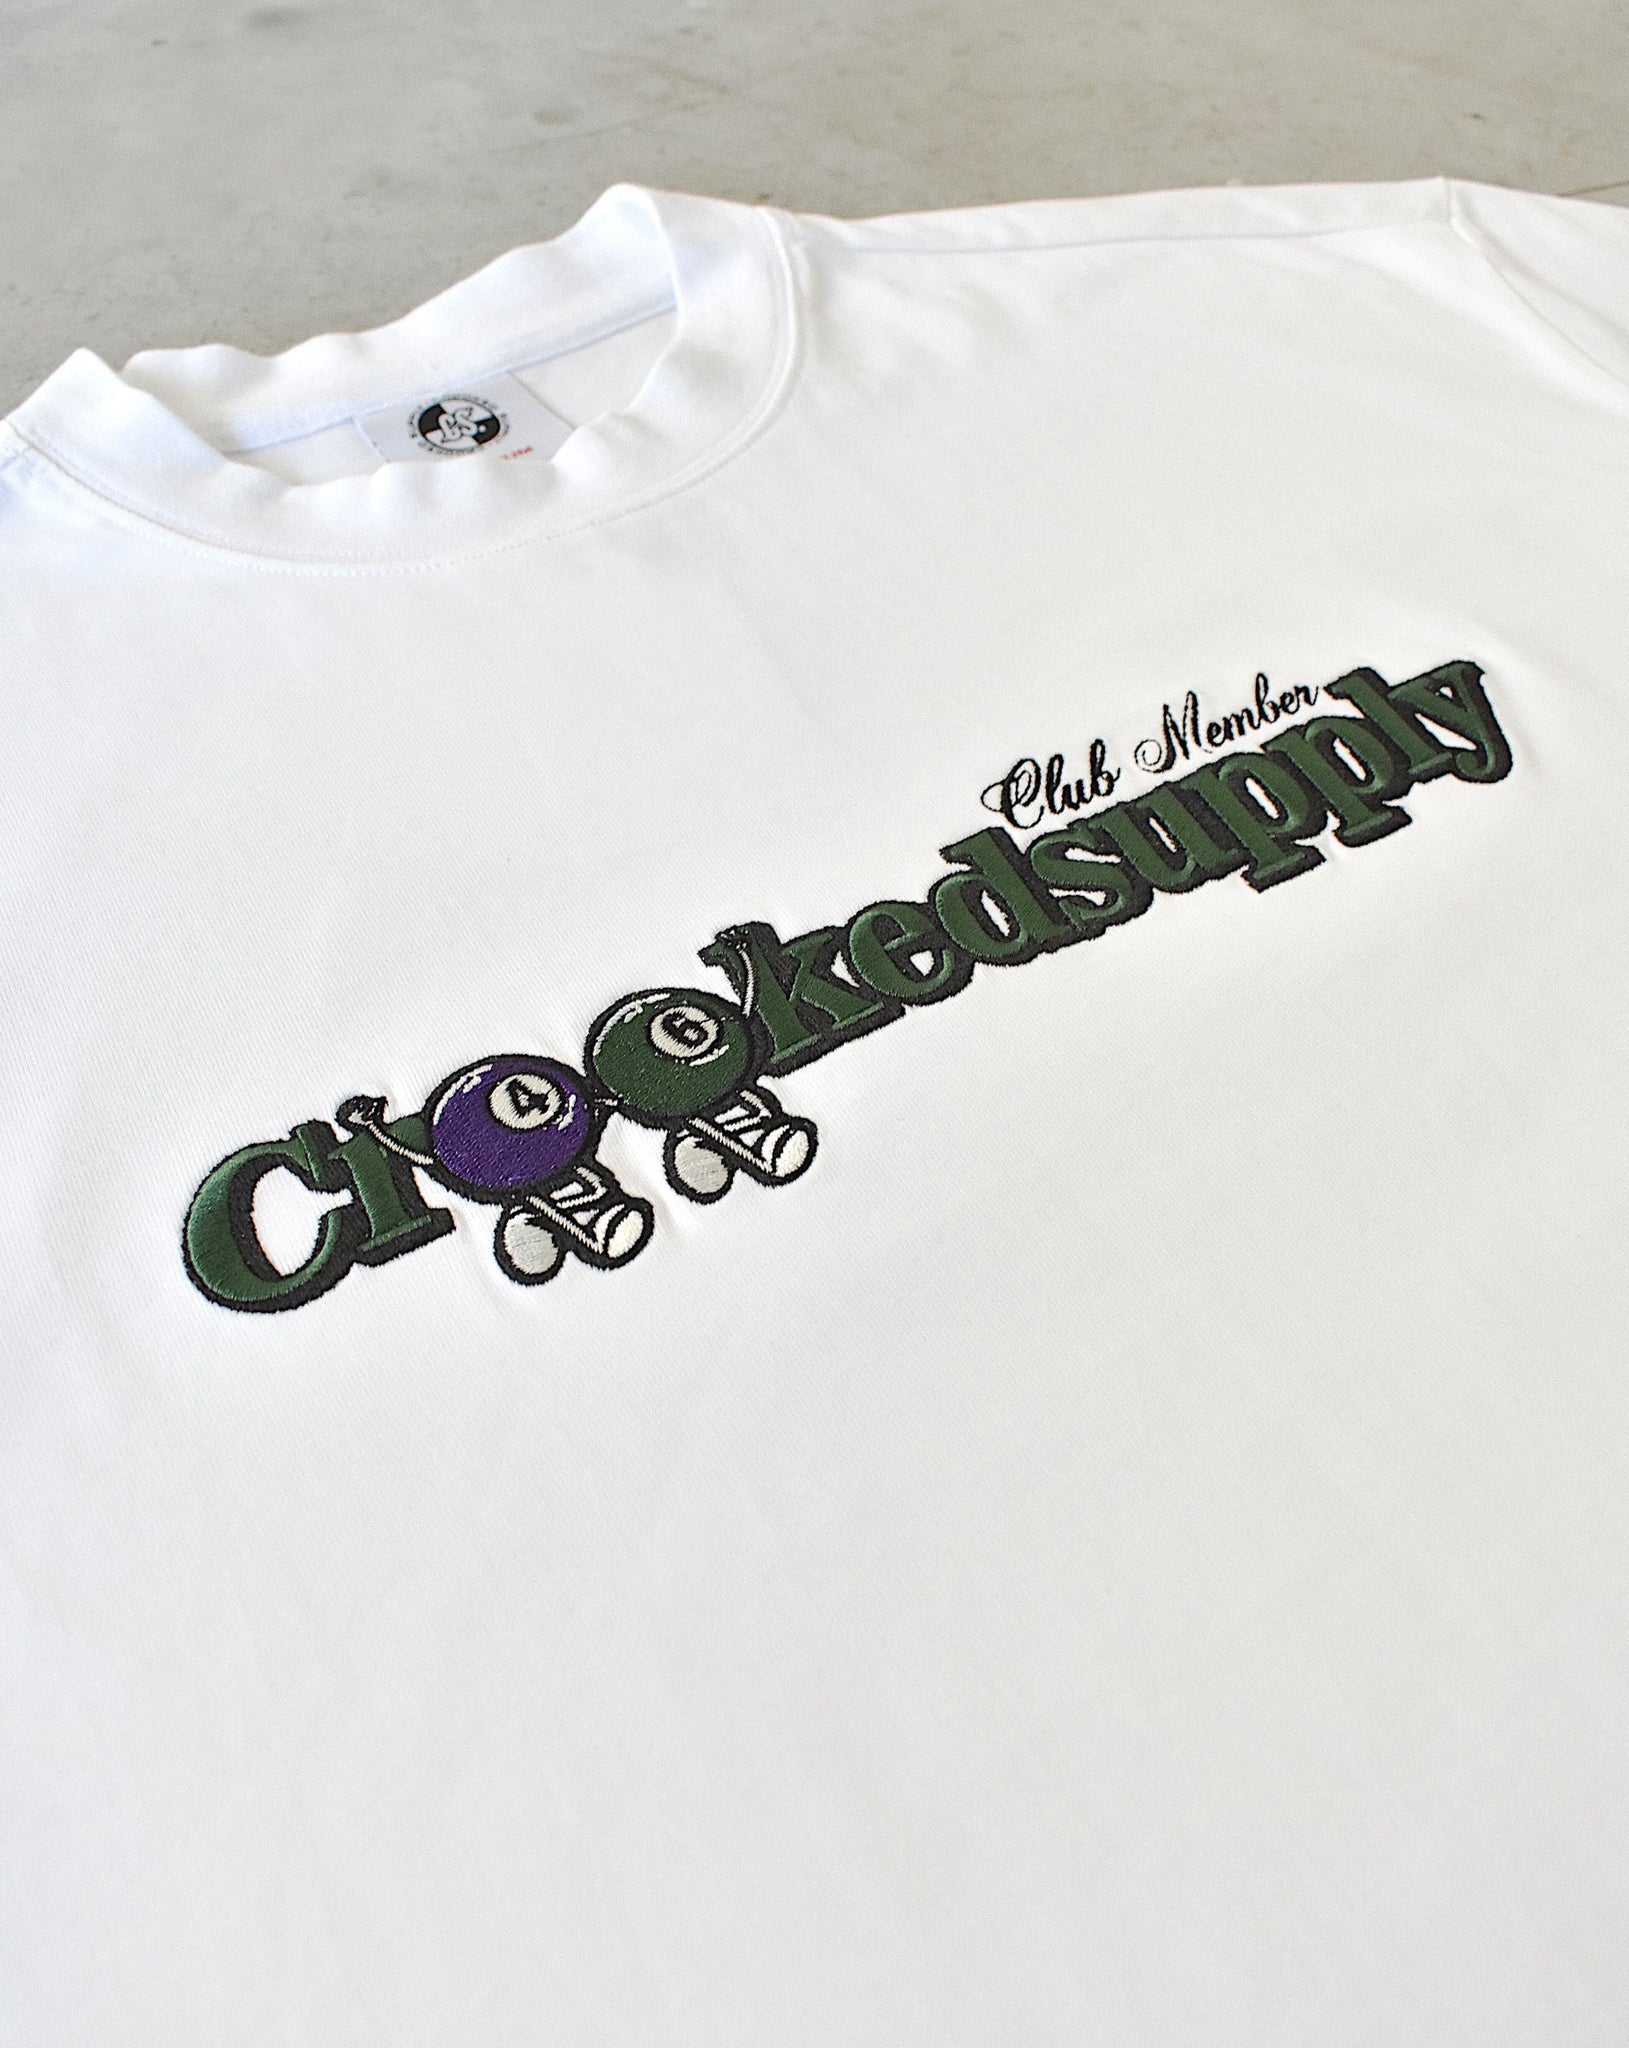 (New) Club Member Tee - White (Embroidered Logo)